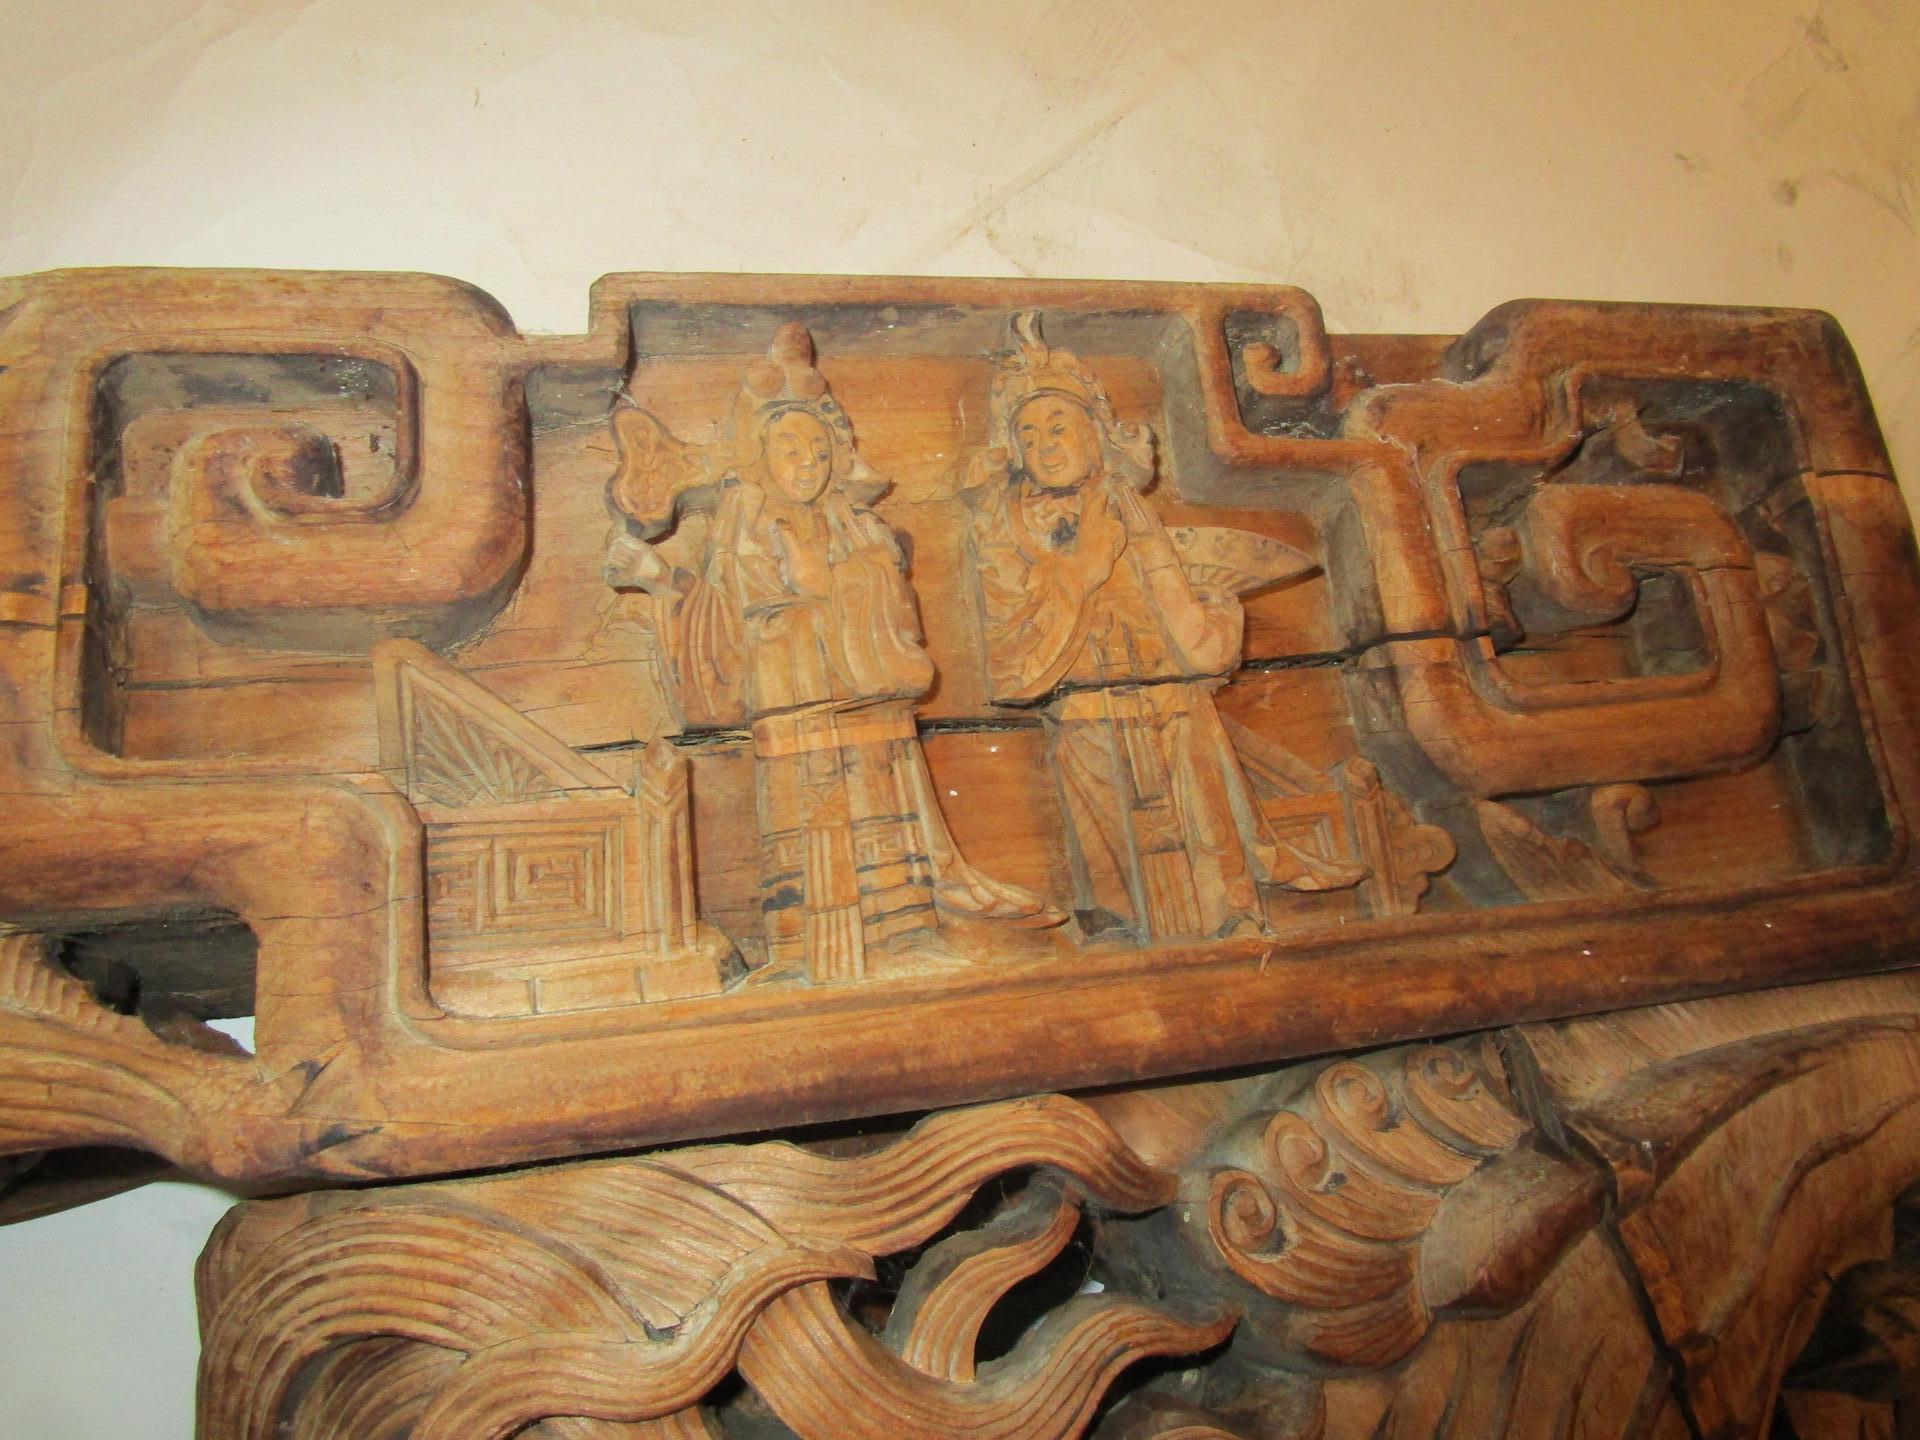 Hardwood 19th Century Asian Wooden Architectural Temple Carvings, Pair